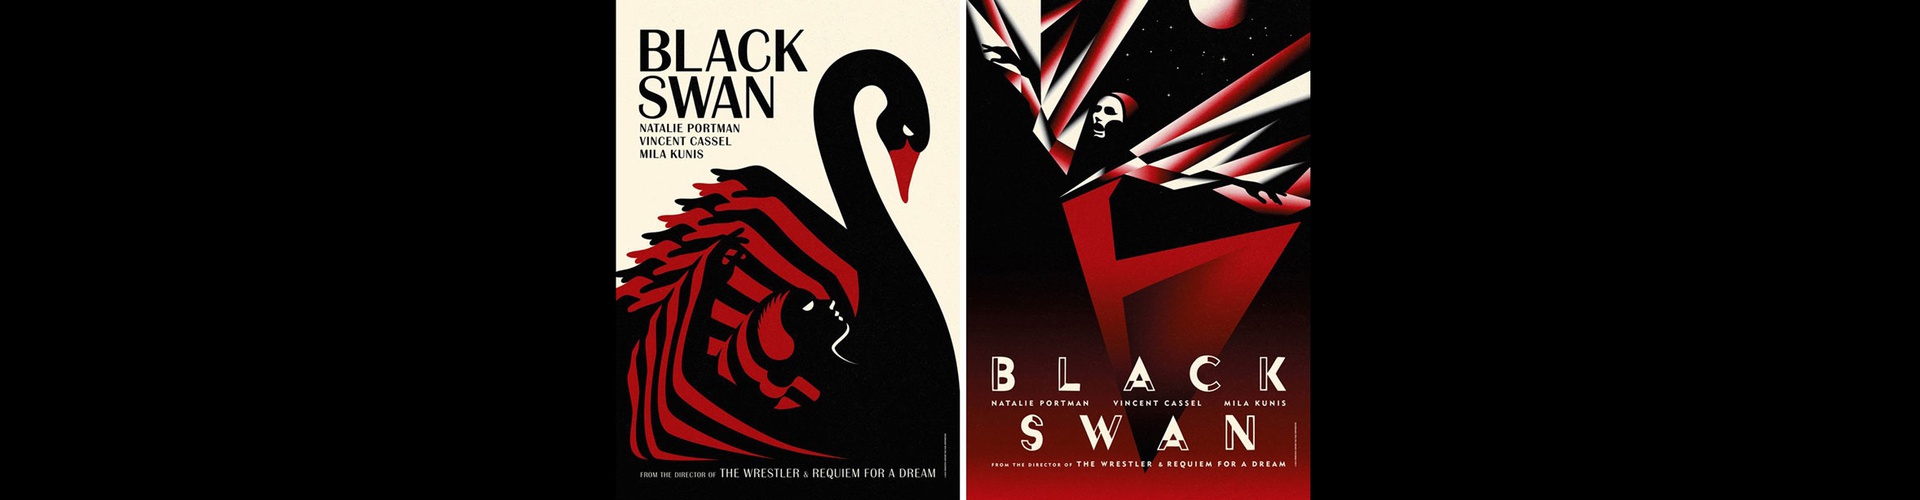 Gallery of Posters & Illustrations by  Scot Bendall-UK